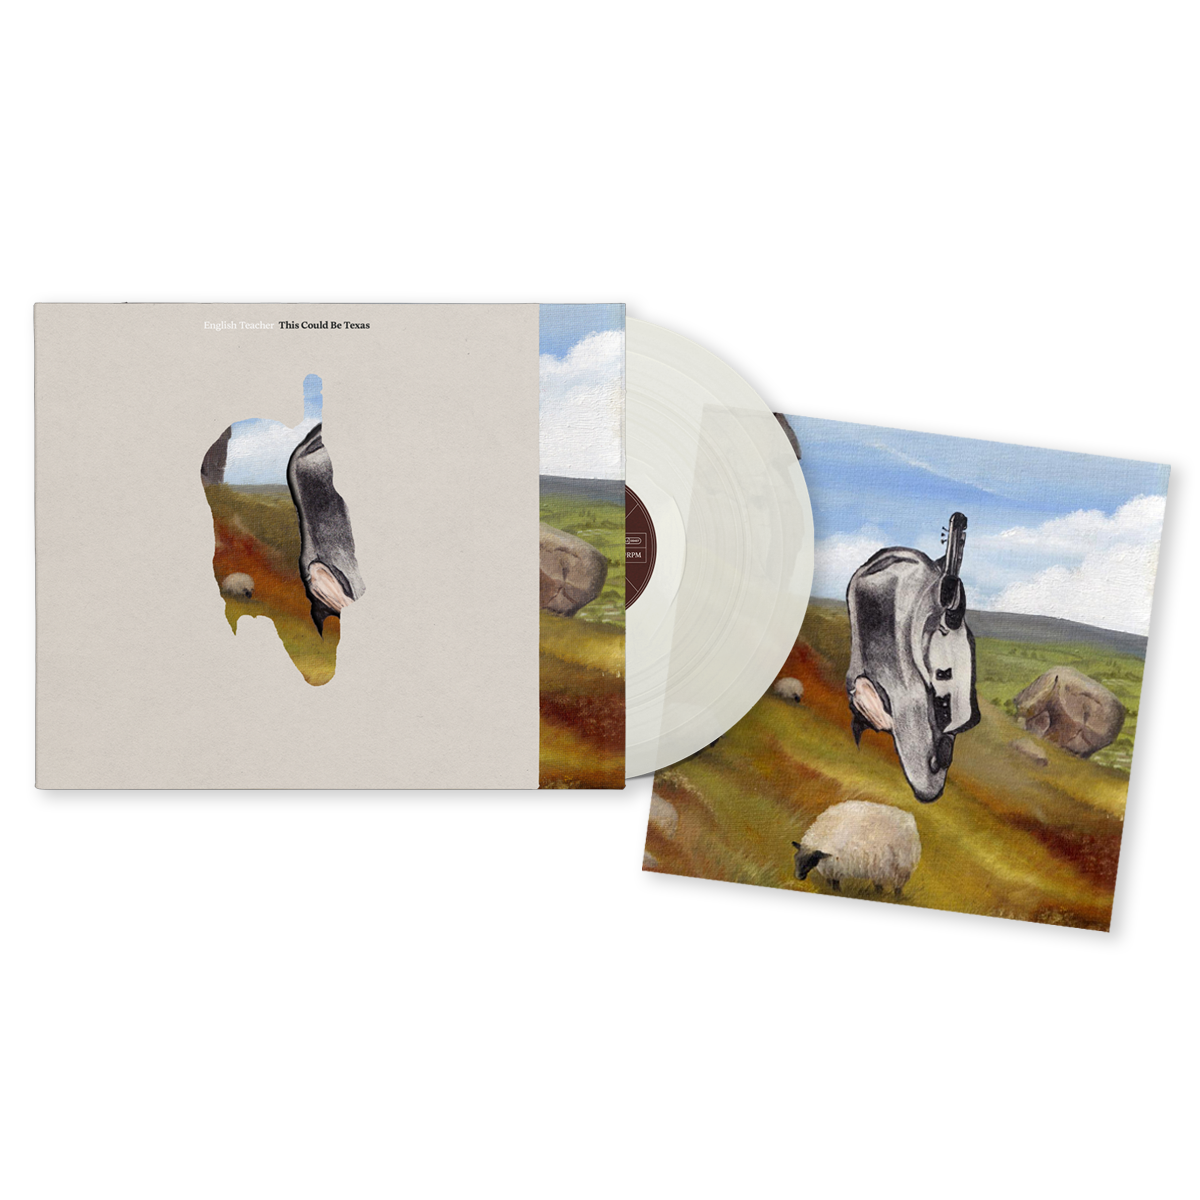 This Could be Texas: Limited Milky White Vinyl LP + Exclusive Signed Art Card